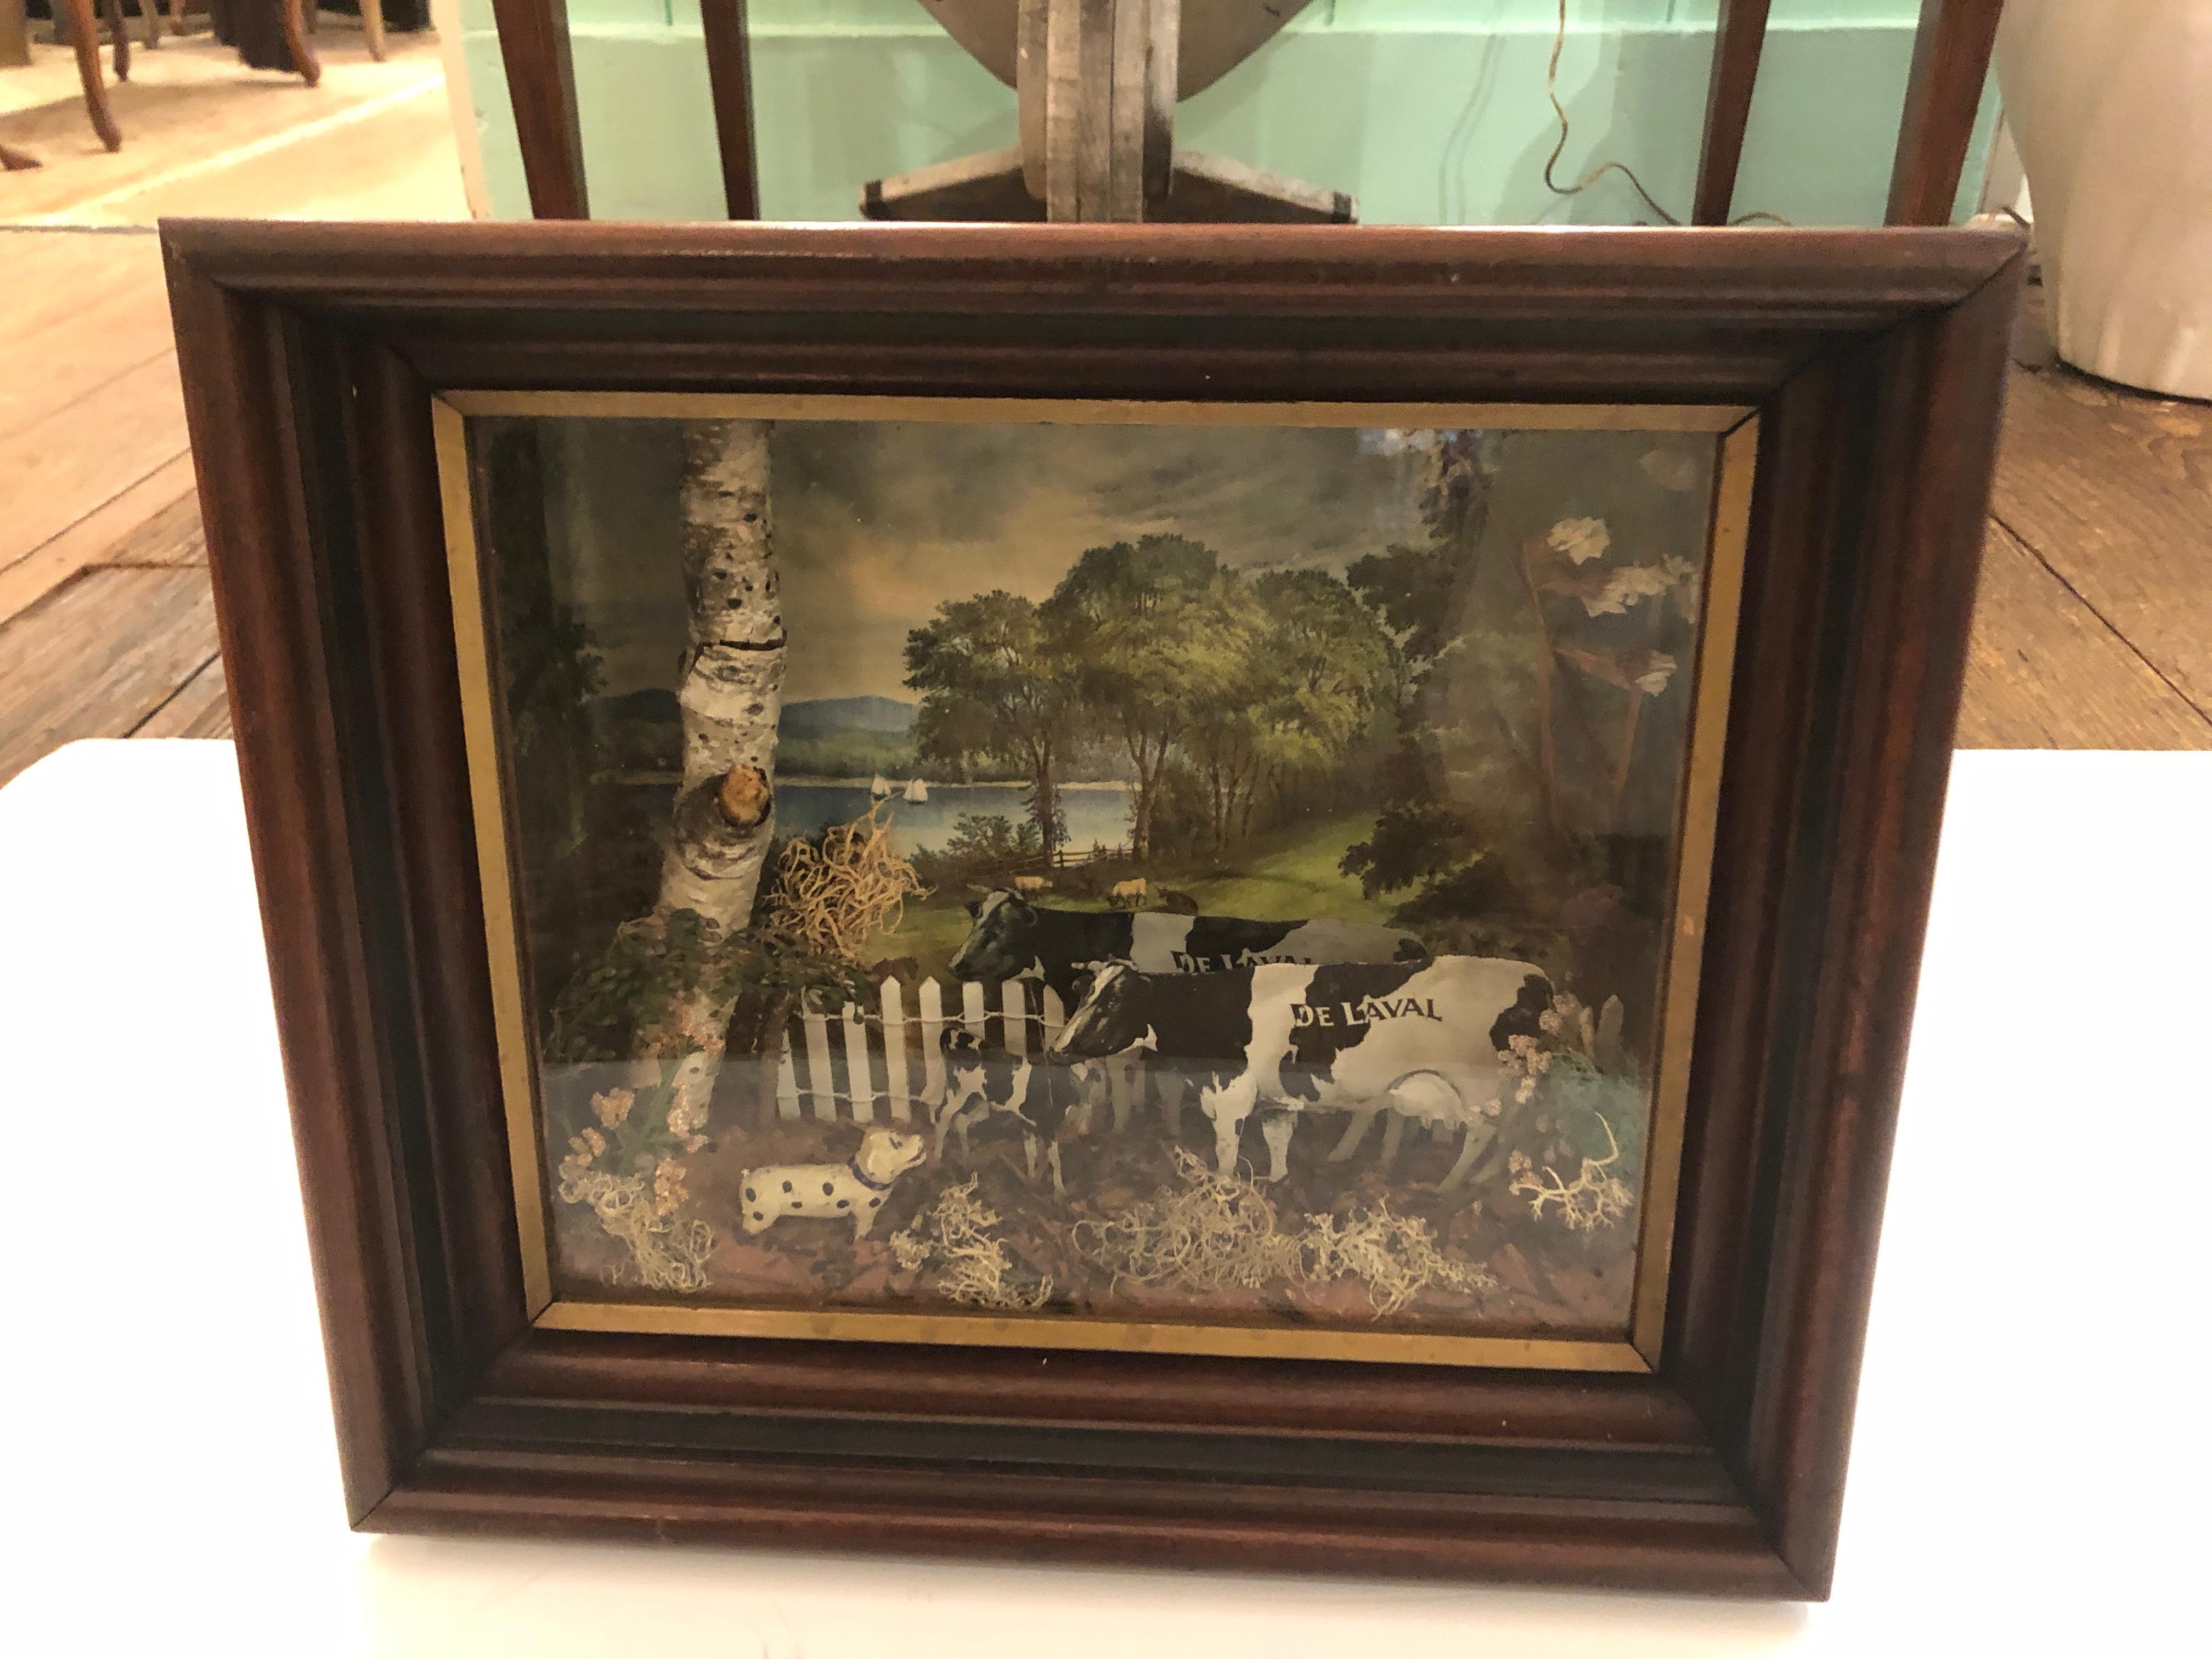 Charming very dailed diorama in a mahogany and glass shadowbox having adorable pastural scene with cows, dog, and farm country scene.